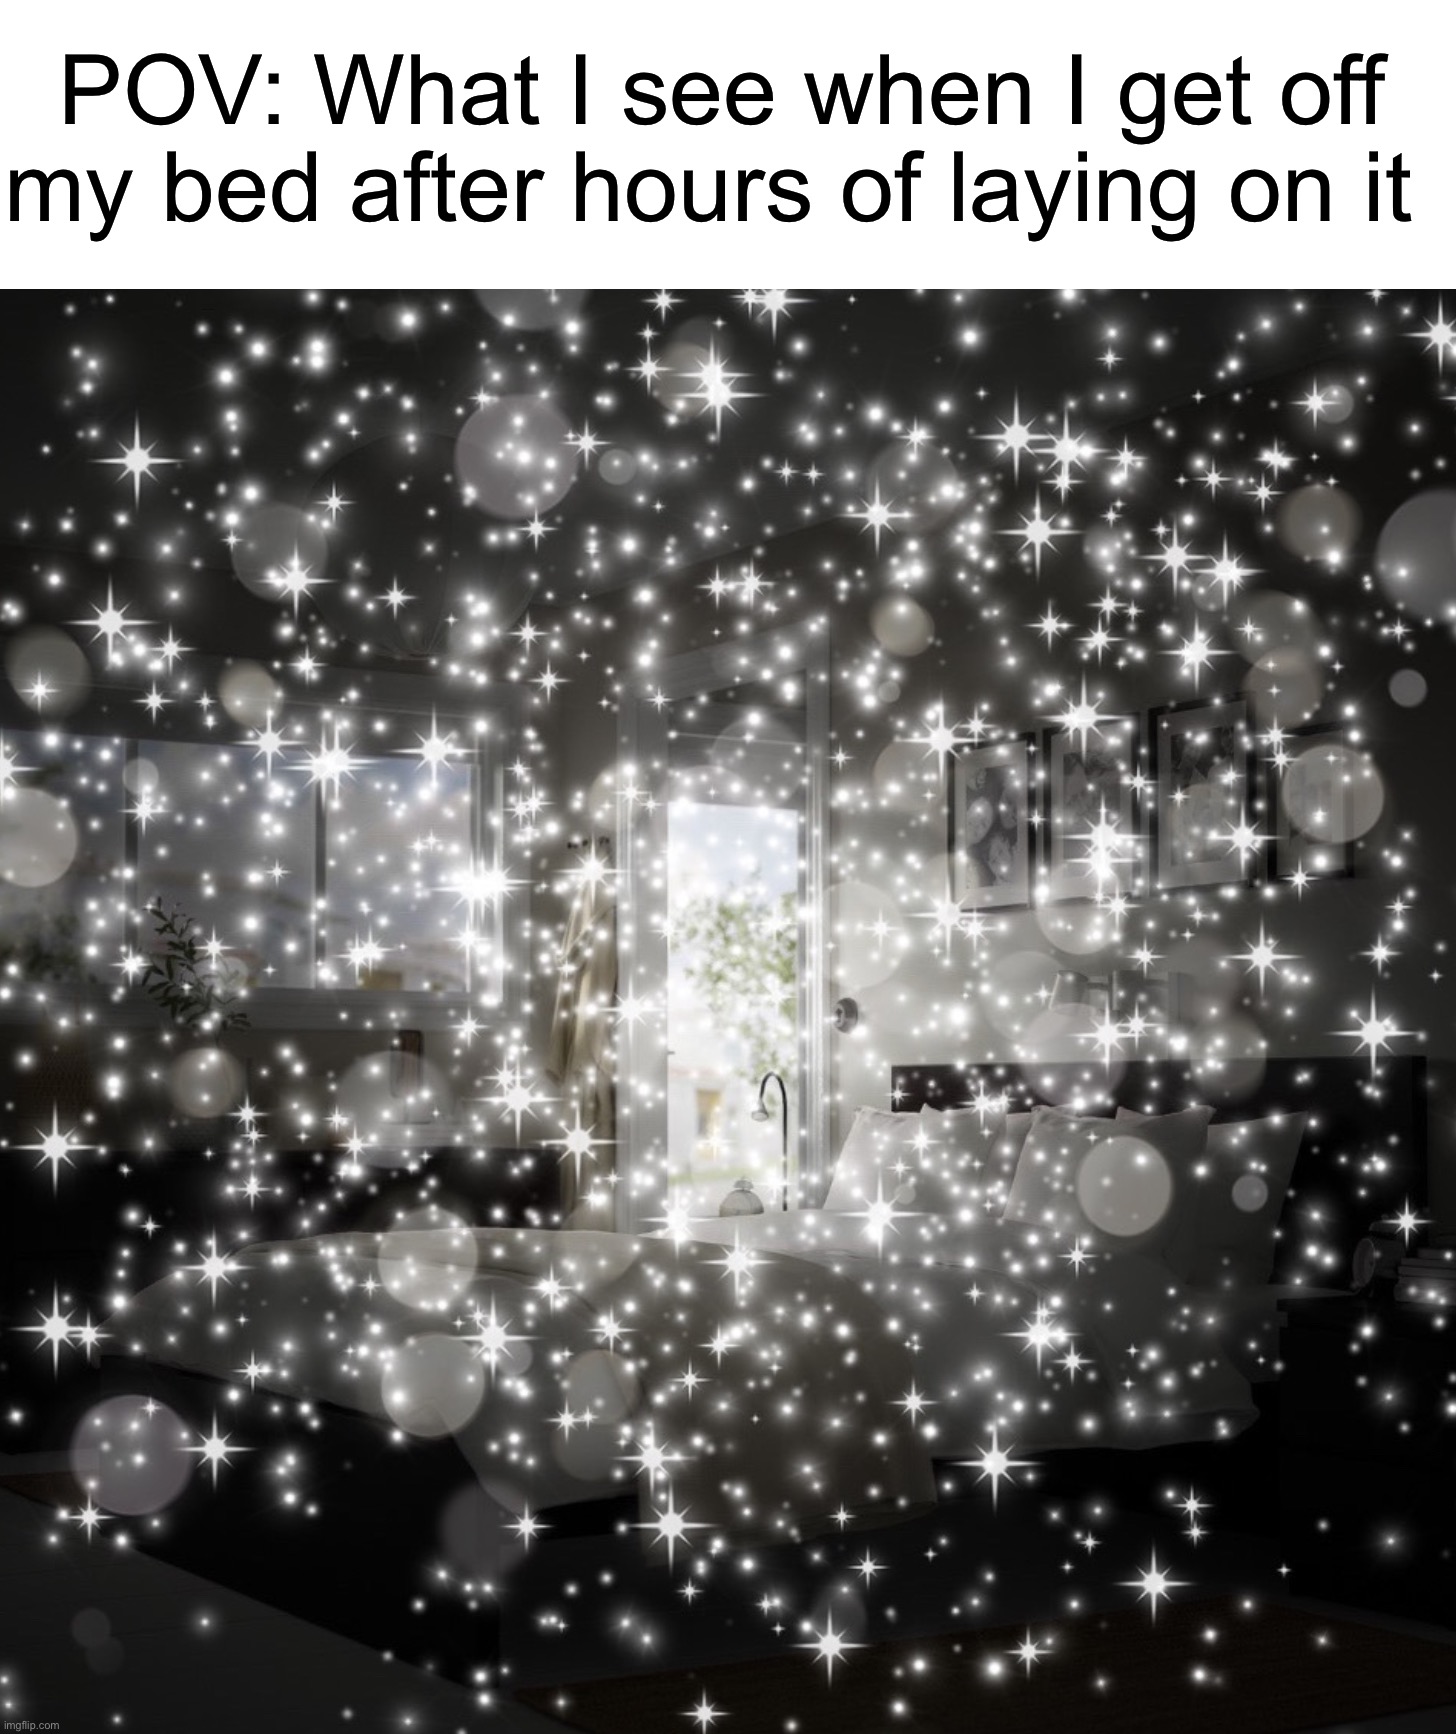 I feel like I’m going to pass out for 5 seconds |  POV: What I see when I get off my bed after hours of laying on it | image tagged in memes,funny,relatable memes,true story,oh no,uh oh | made w/ Imgflip meme maker